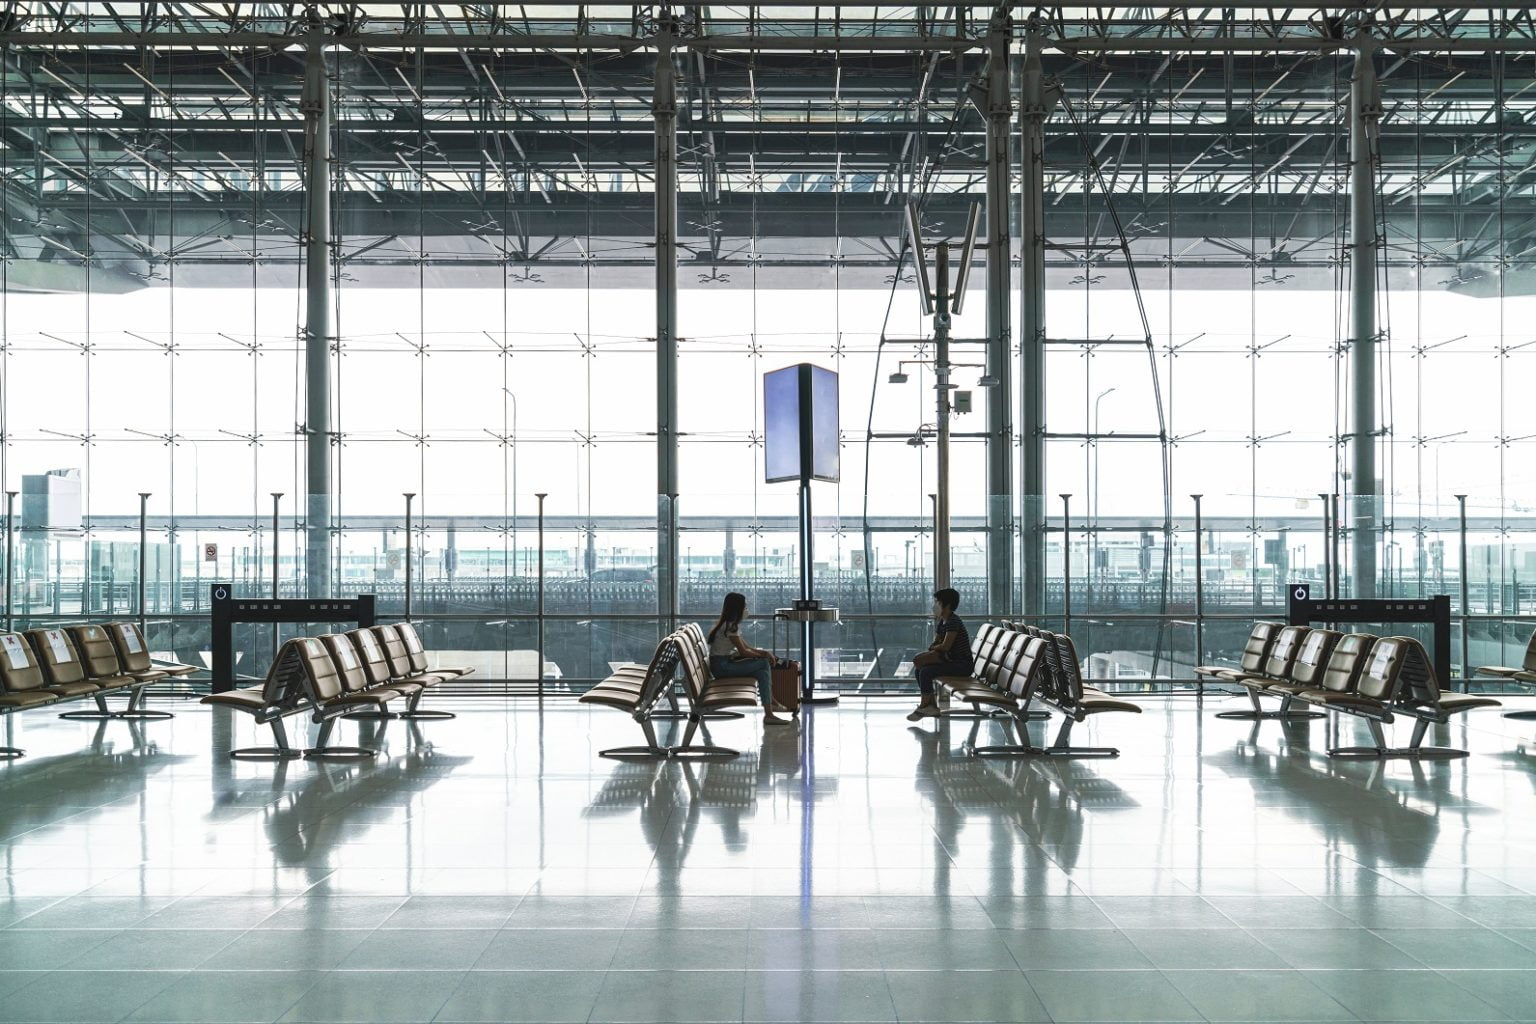 Middle East airports need $151B in development